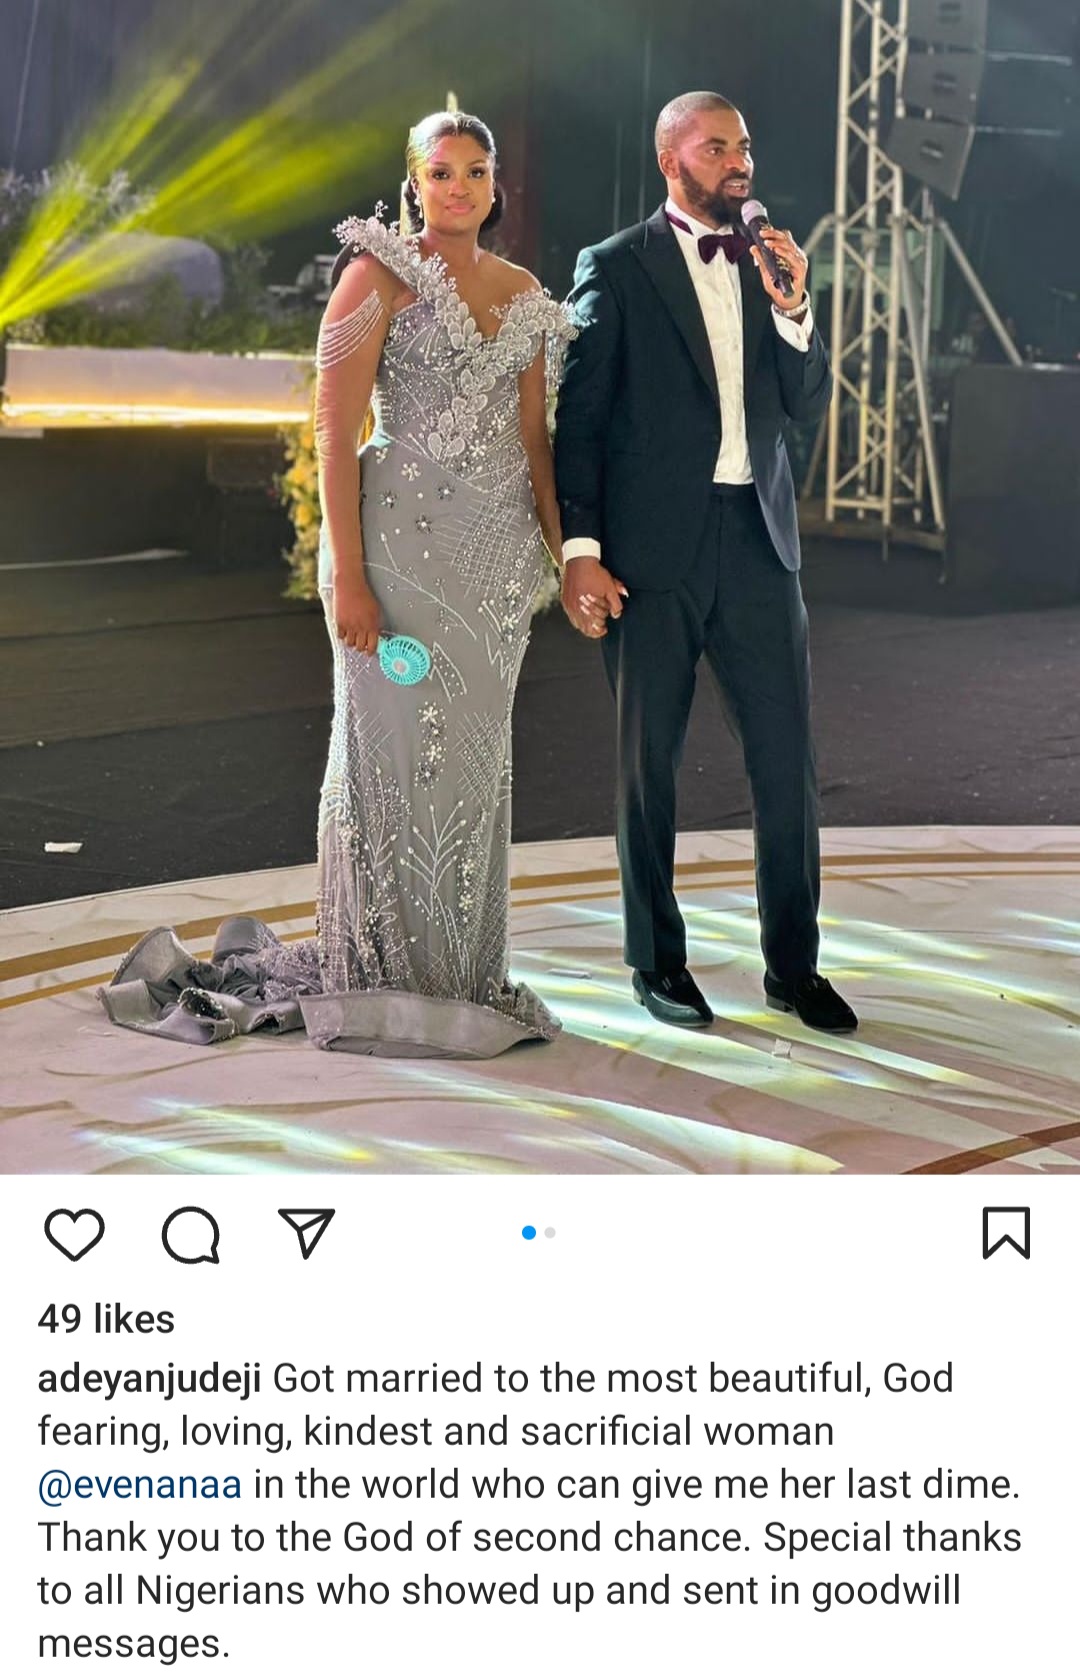 "Thank you to the God of second chance," Deji Adeyanju writes as he reveals his new wife